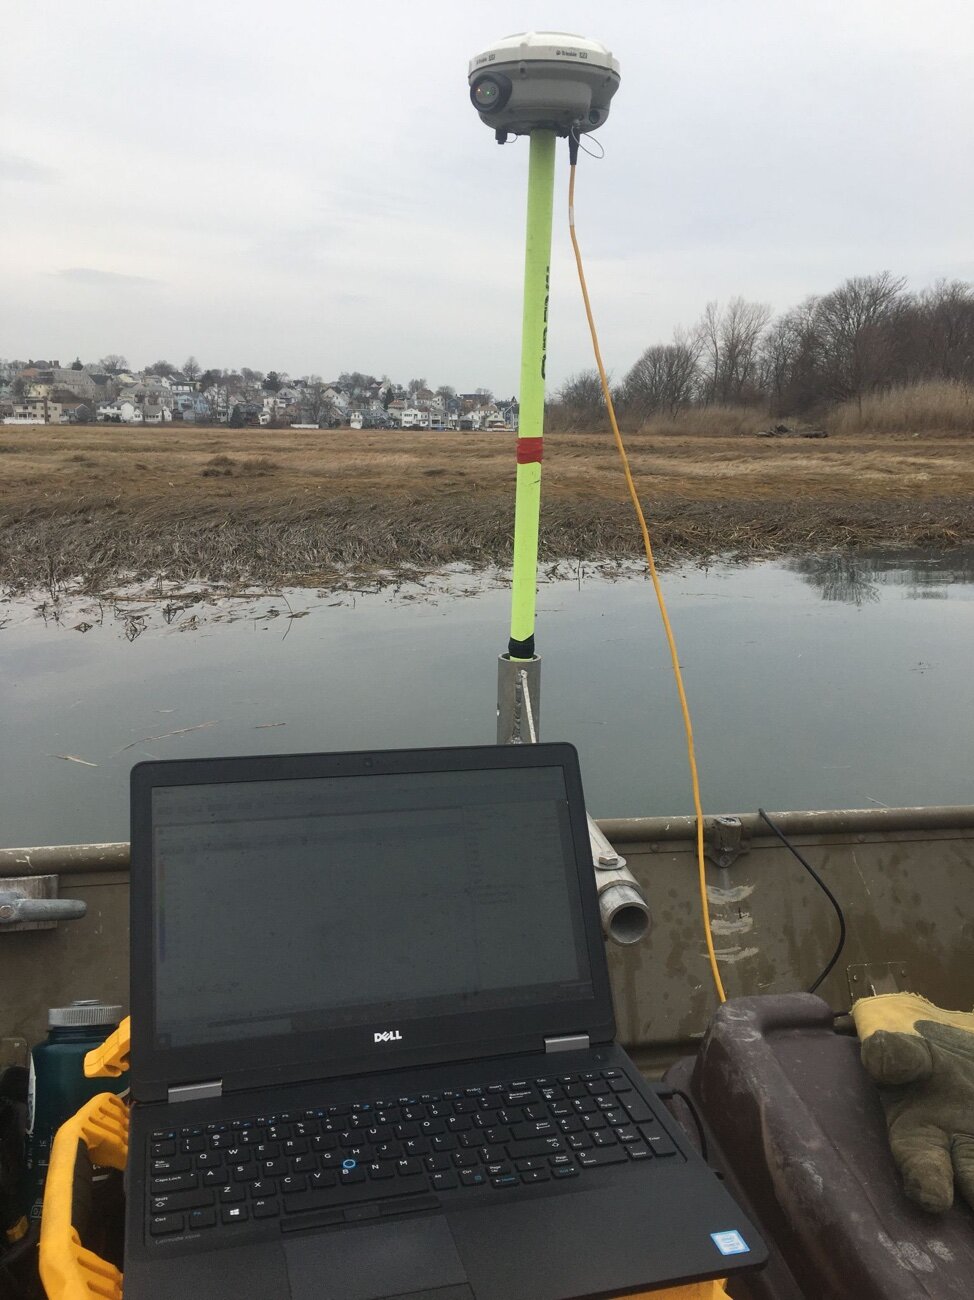   Figures 6-8.  Team mapping bathymetry at Belle Isle.. PC: Ryan Kappel, Woods Hole Group 